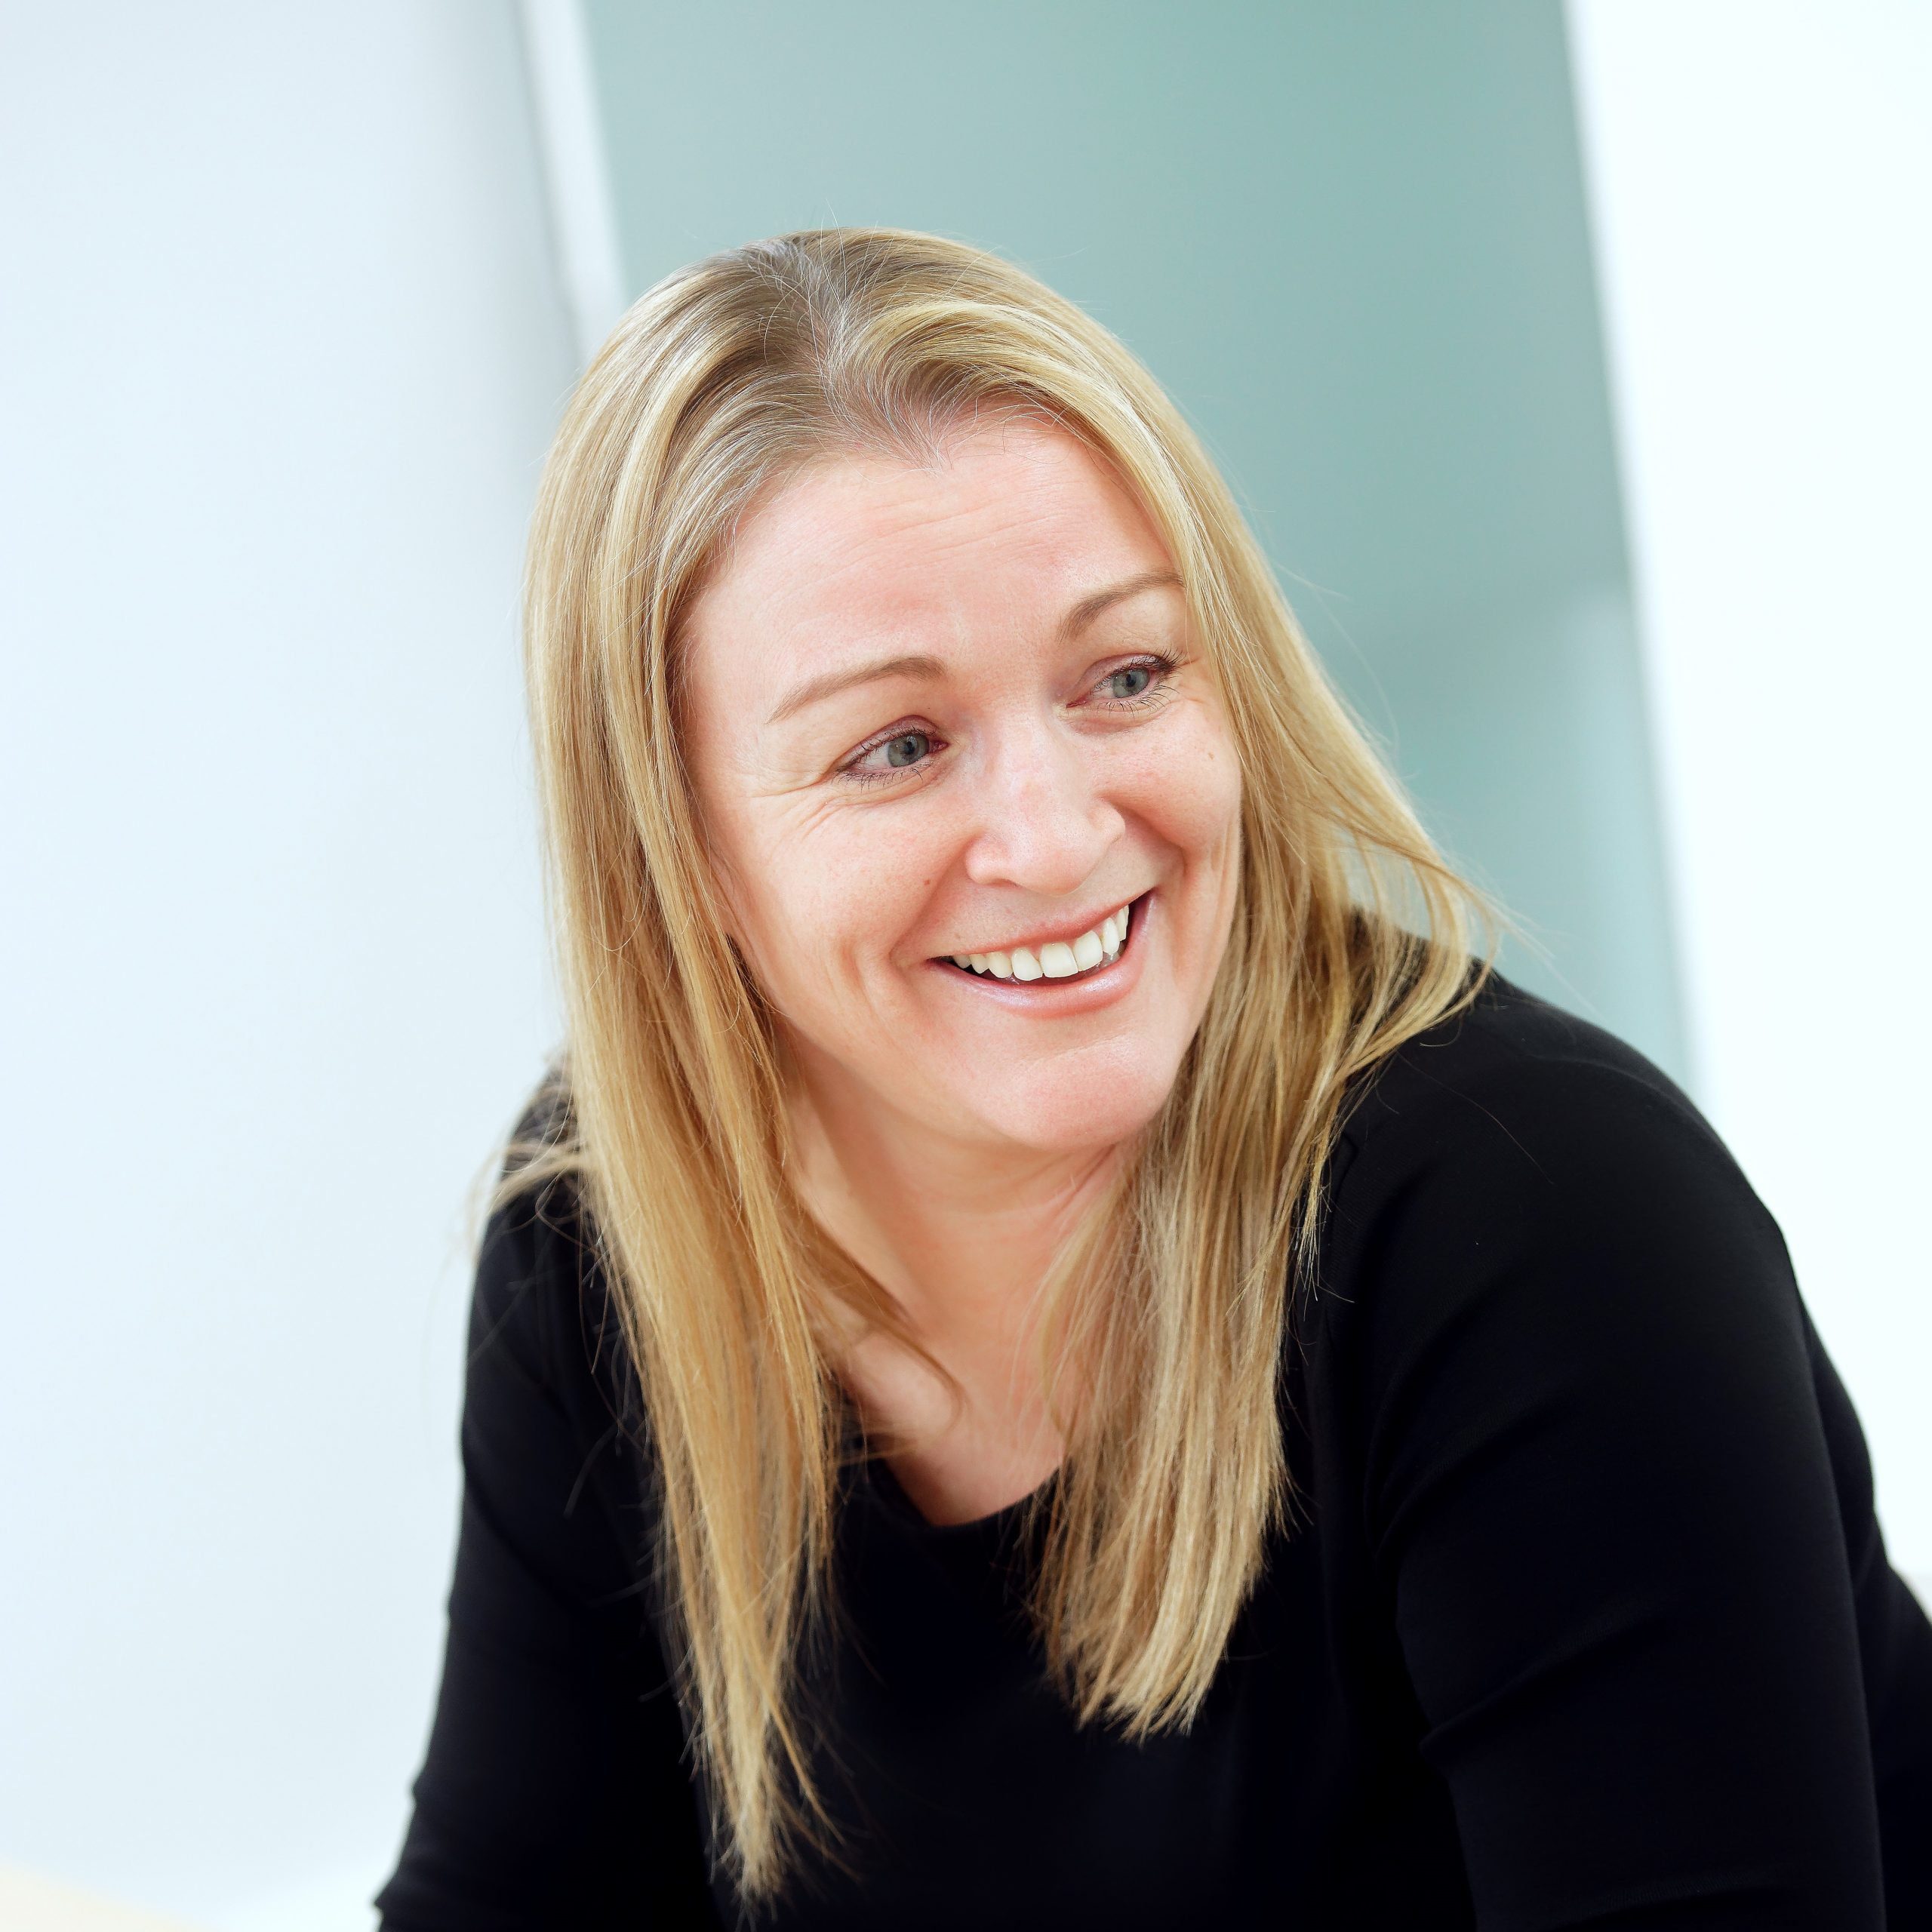 Spotlight:  Natalie Wride tells us all about life at our relocated office in Barry.